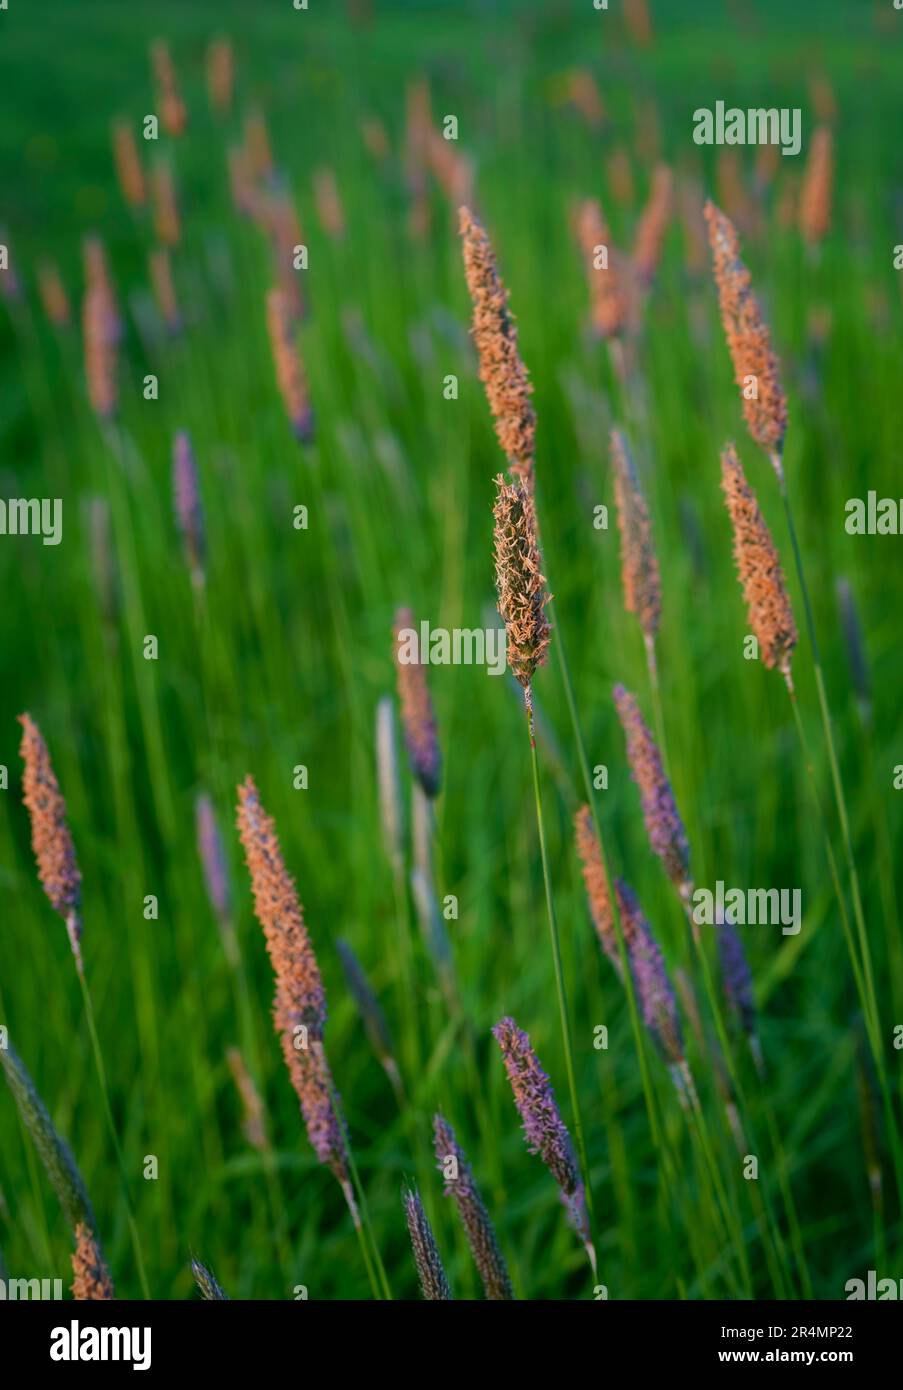 A close up of Meadow foxtail grass seed heads. Stock Photo